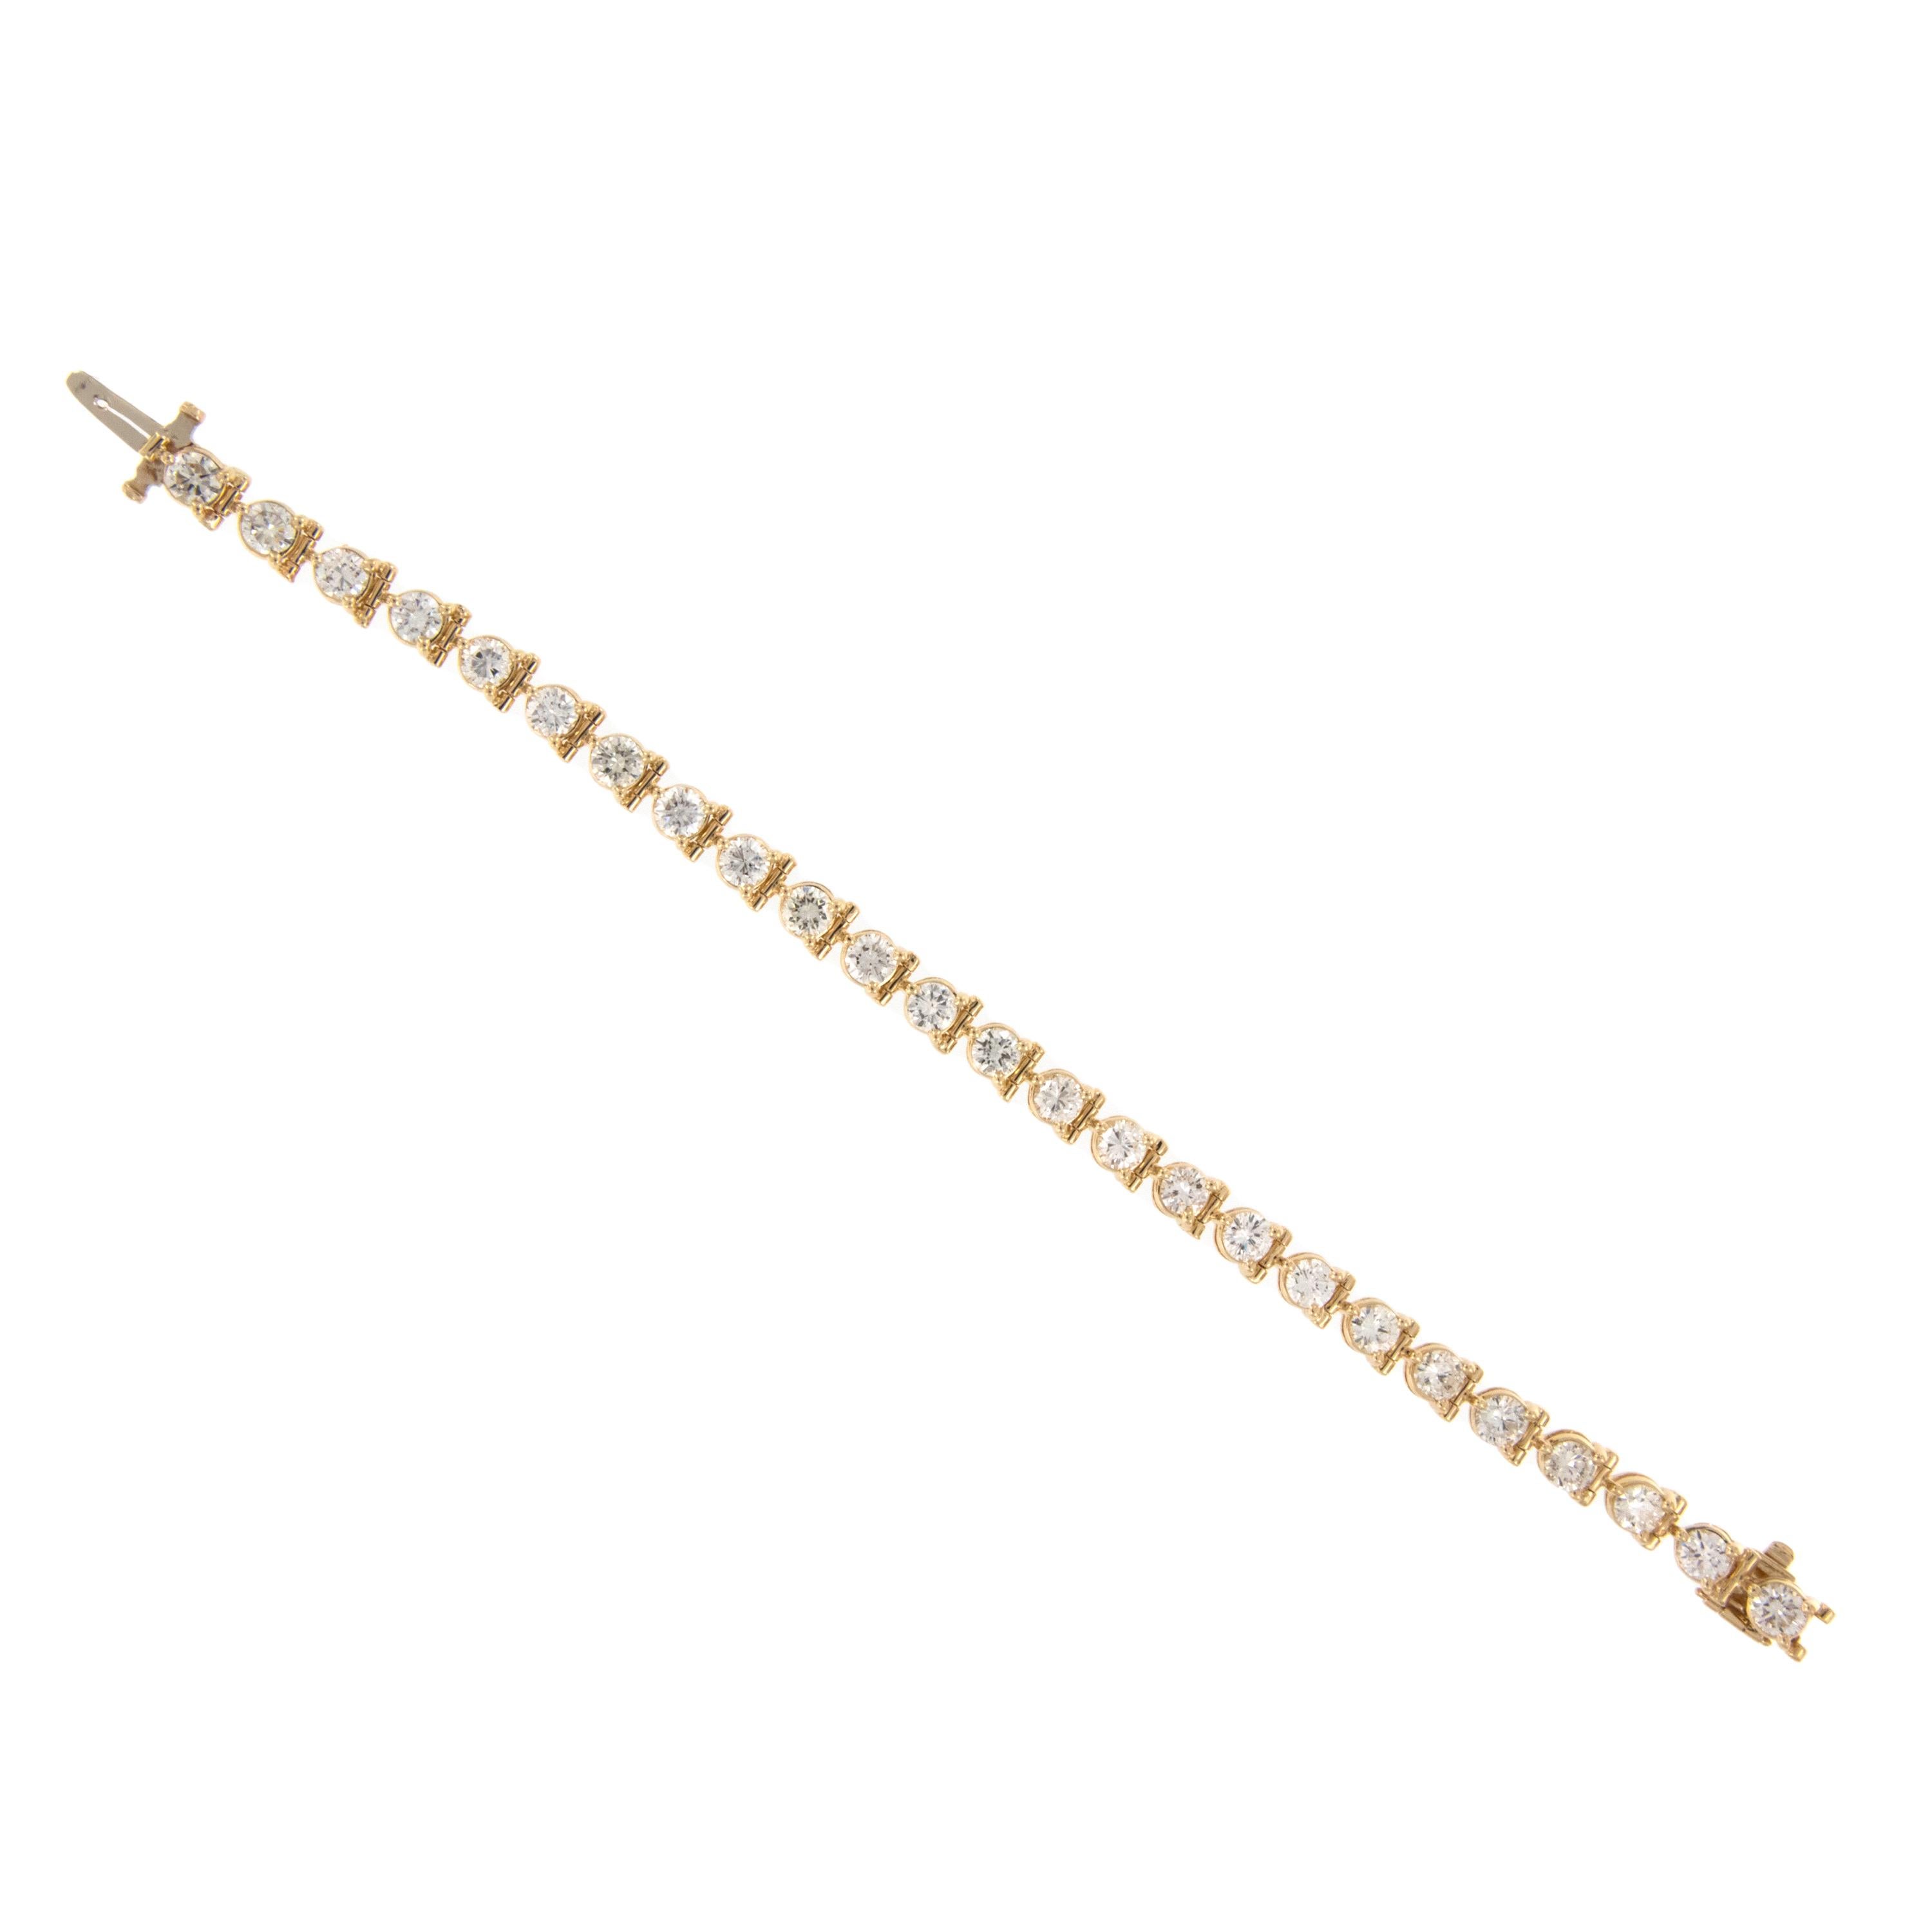 The tennis bracelet ; one of the essential staples for all, whether you are a fashionista, career woman, mom or jet setter - this bracelet is for you! Made from 14 karat yellow gold and featuring an impressive 6.75 Cttw of round brilliant cut